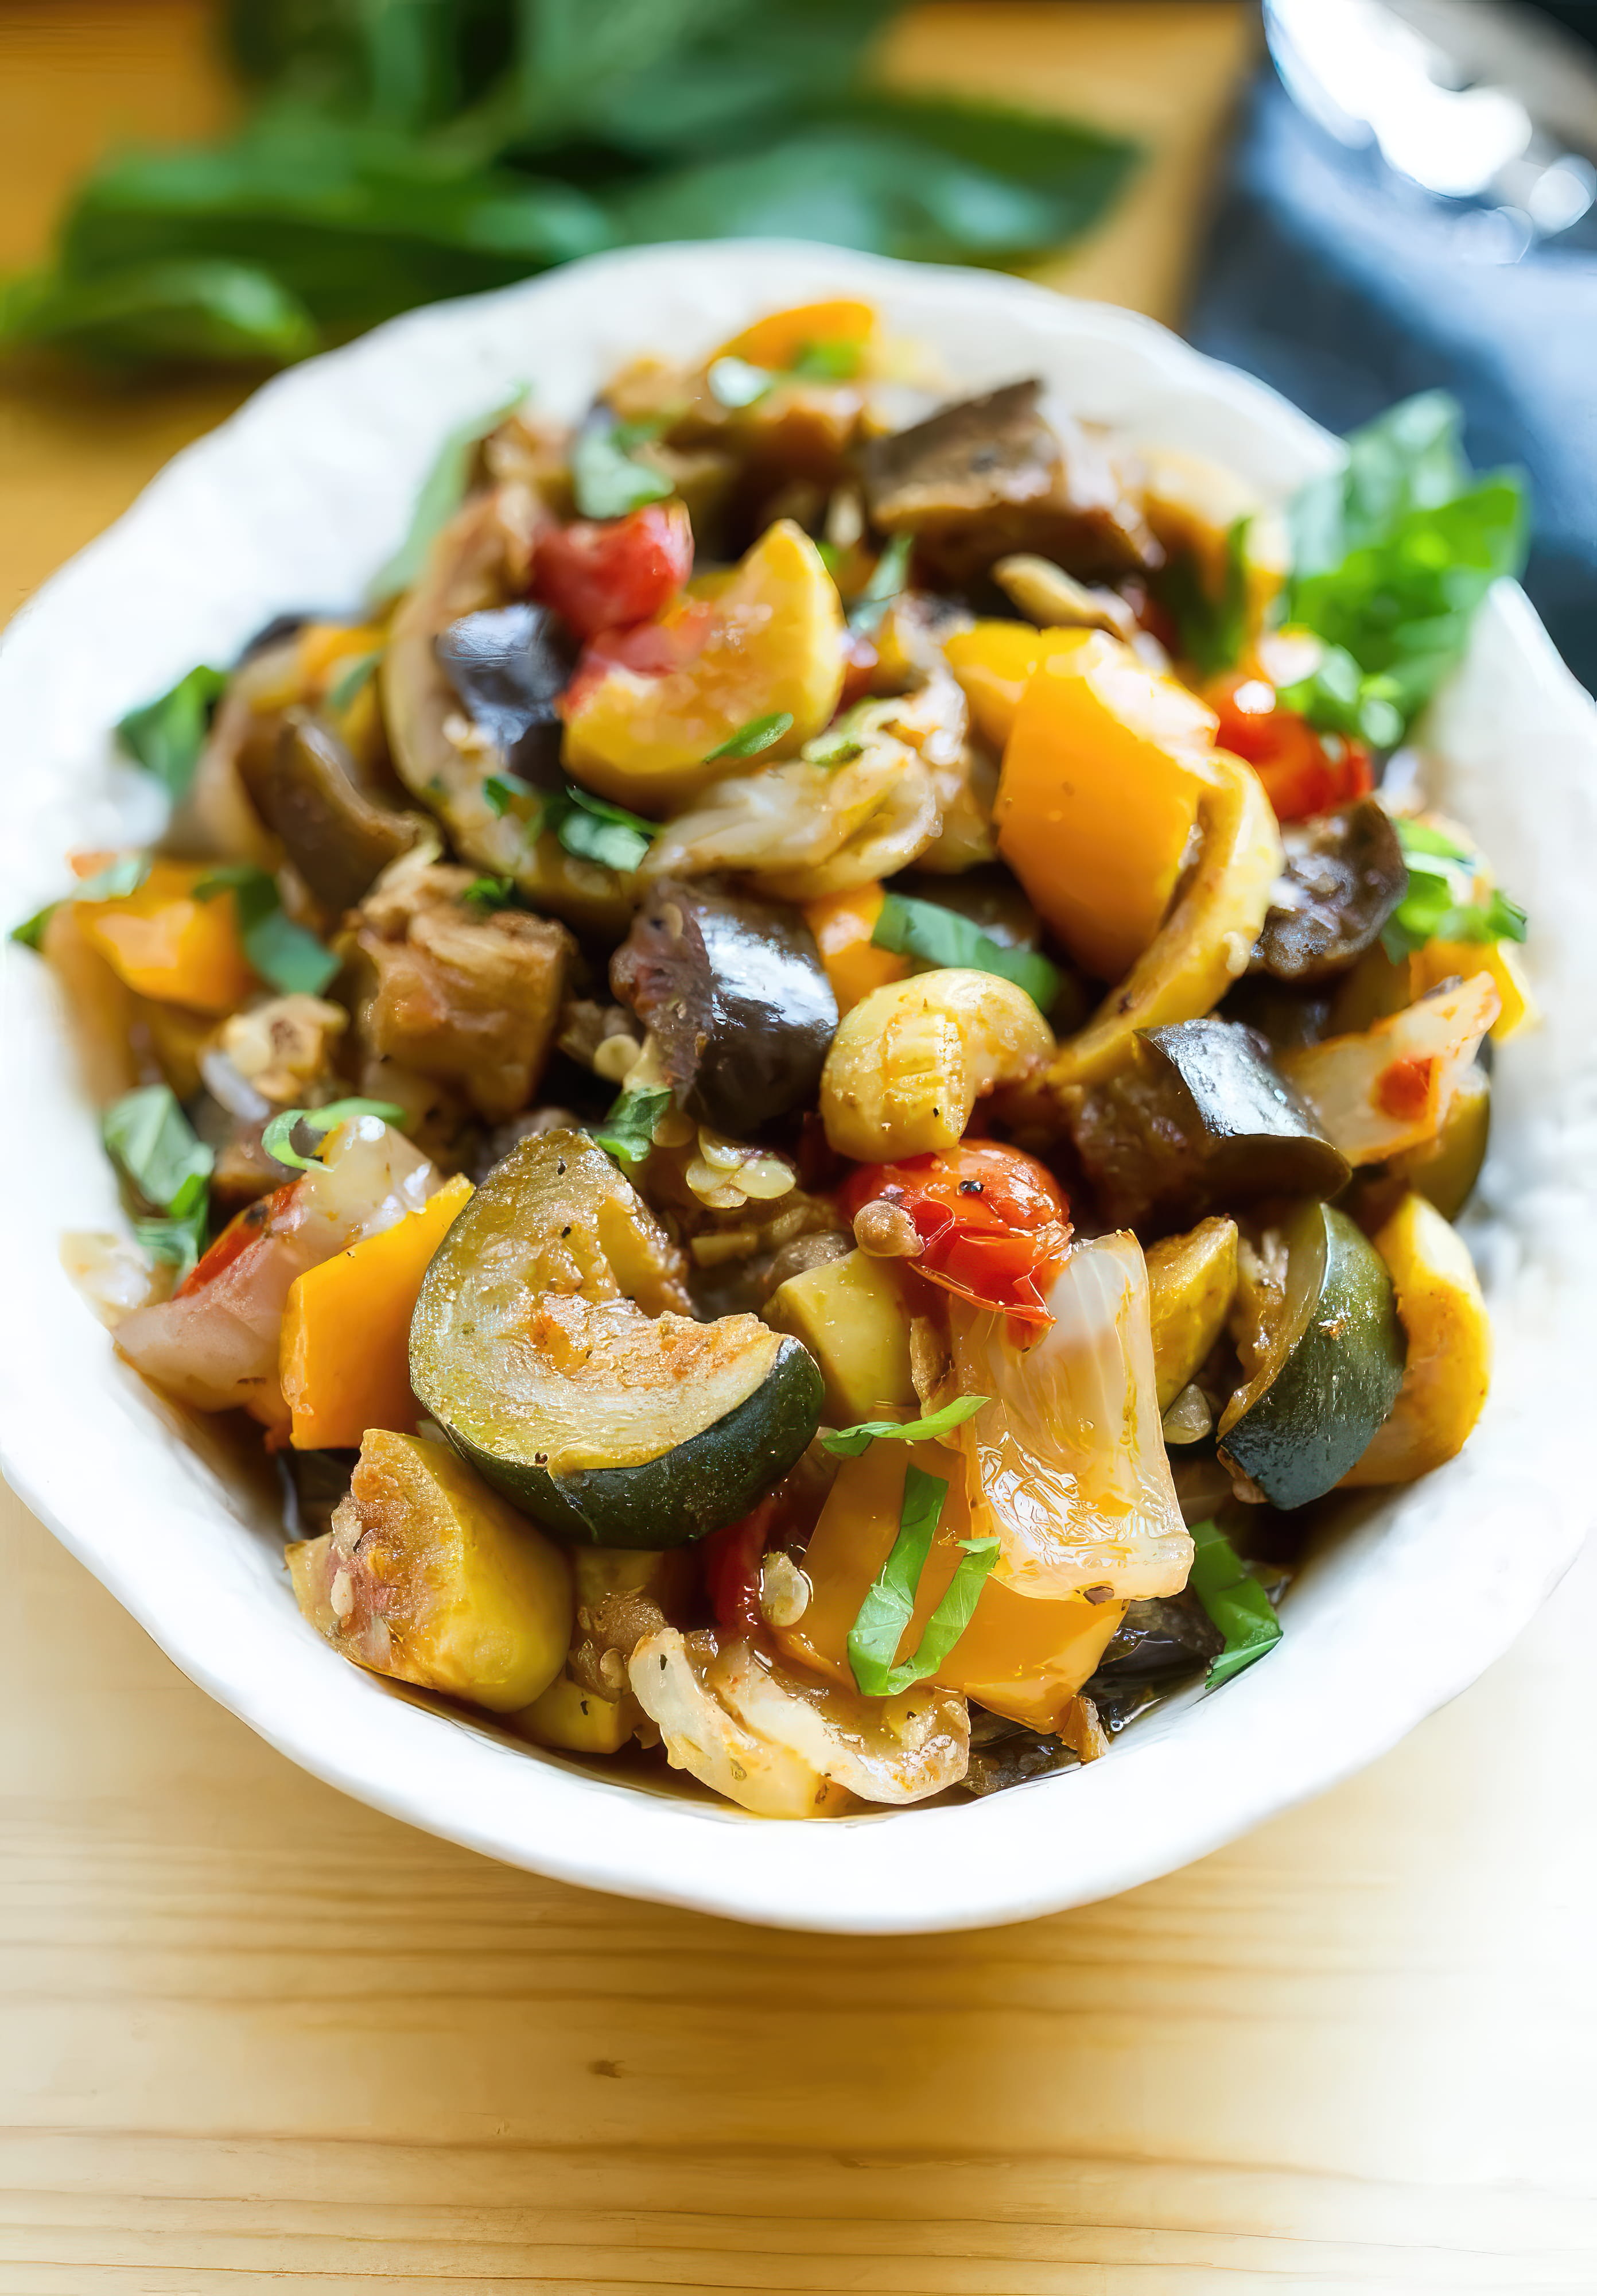 Image of slow cooker ratatouille